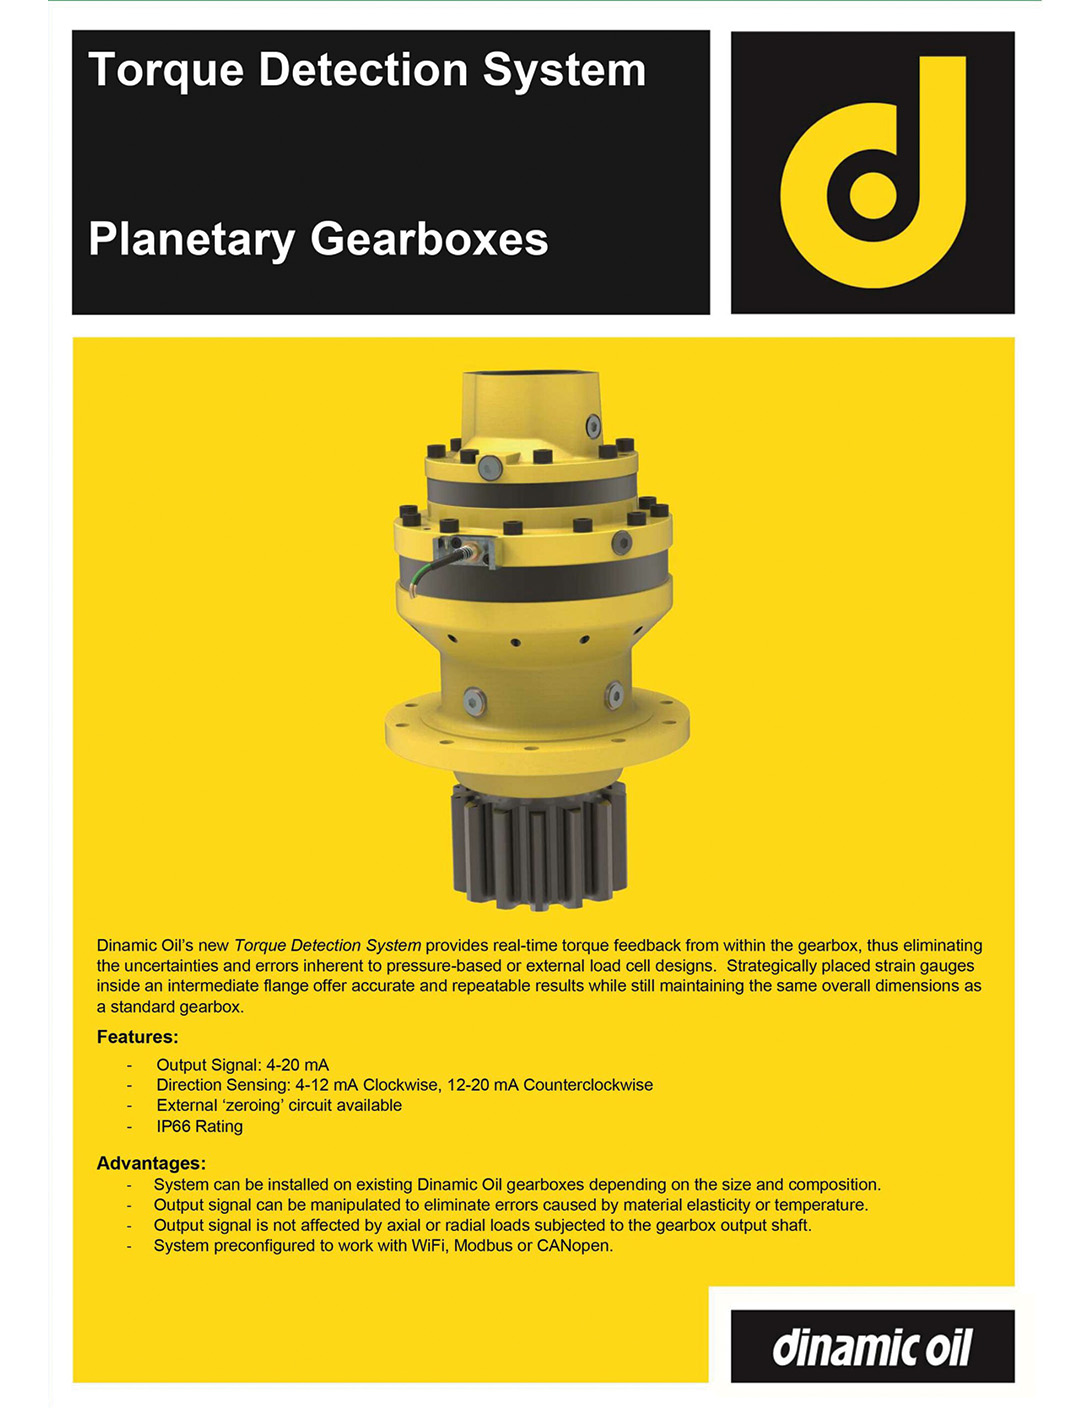 Torque Detection System – Planetary Gearboxes